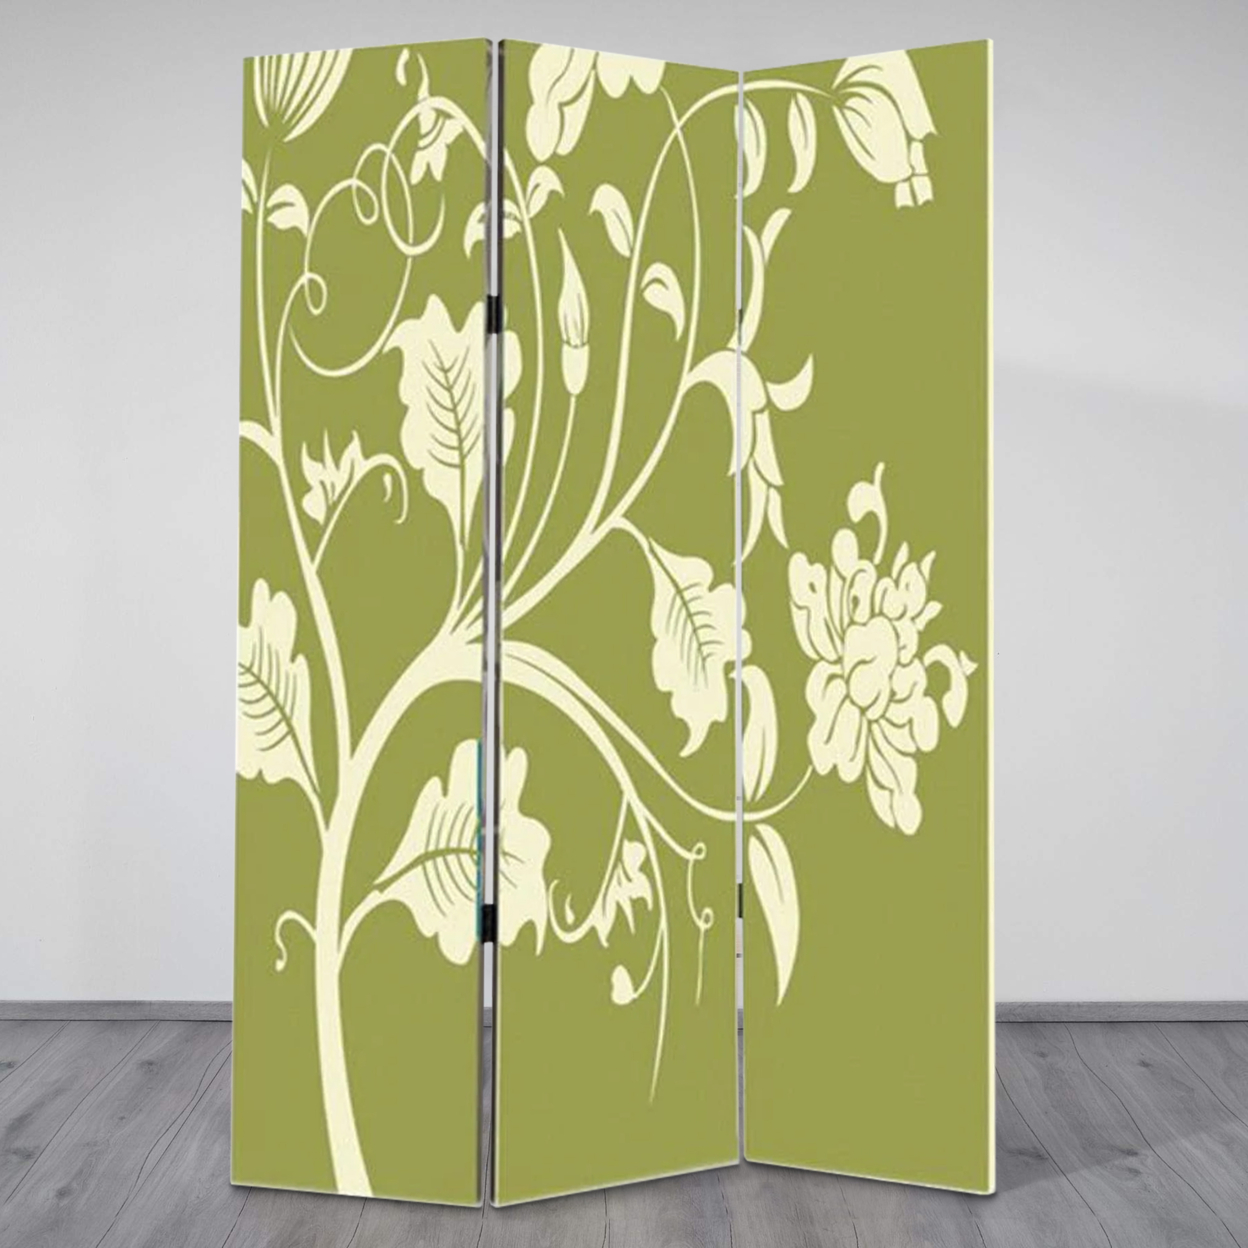 3 Panel Room Divider With Stems And Flower Pattern, Cream And Green- Saltoro Sherpi